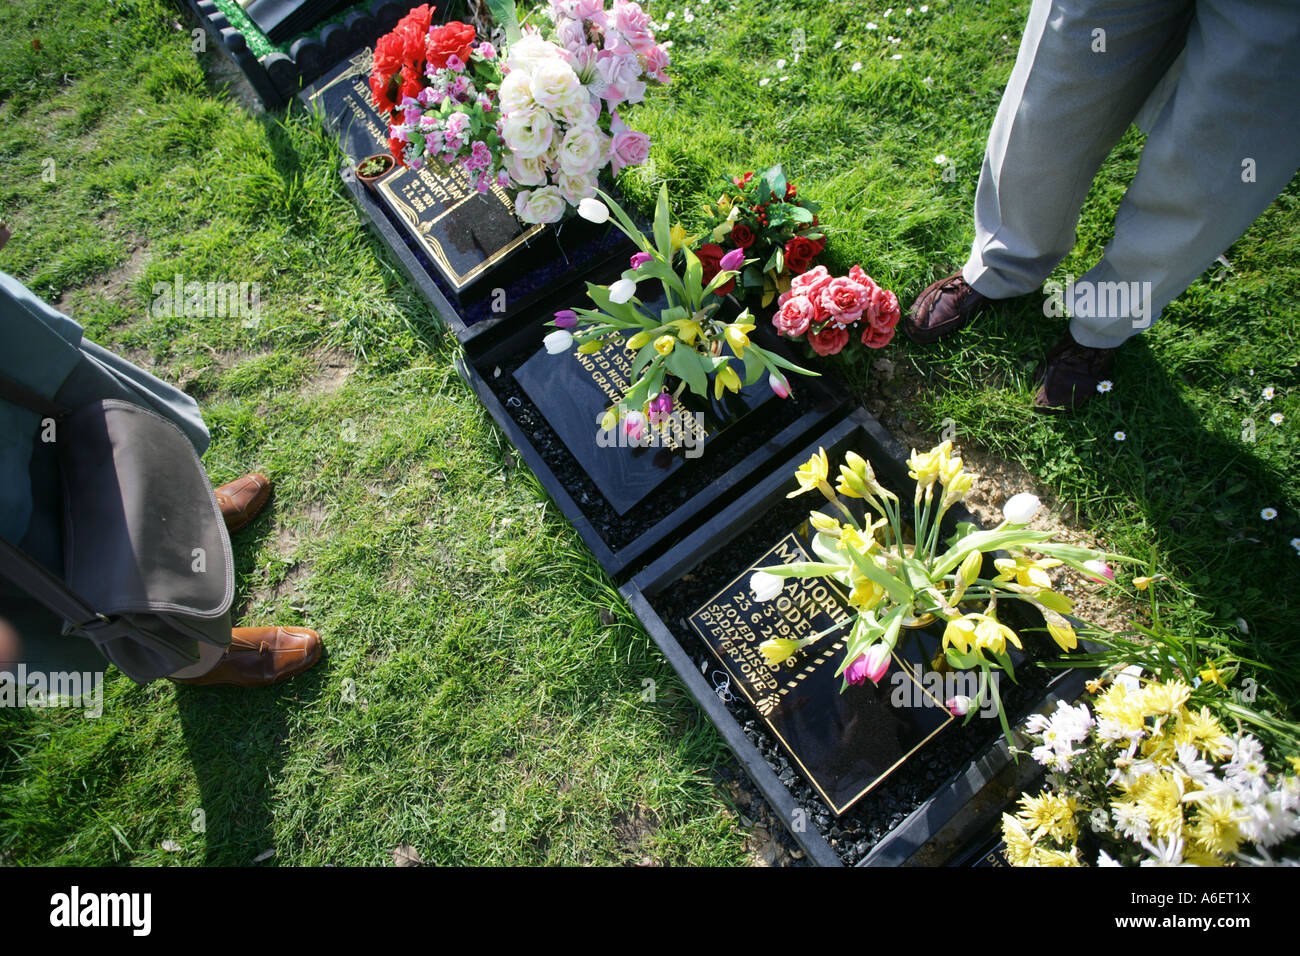 Family members paying their respects by the grave of a loved one at a cemetary, Essex, England, UK. Stock Photo